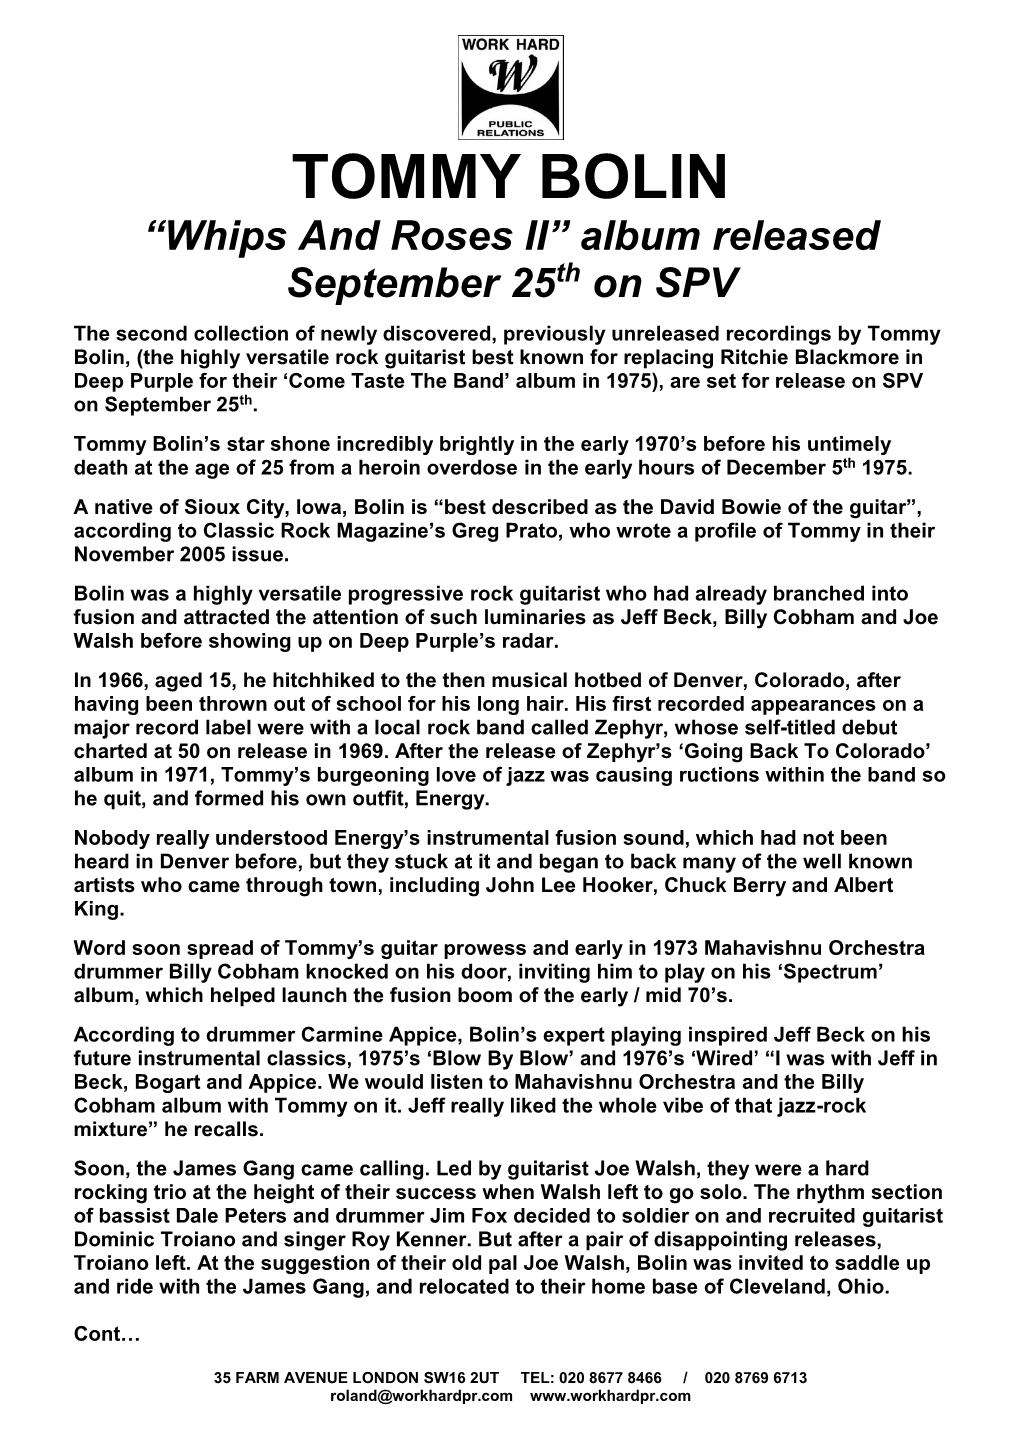 TOMMY BOLIN “Whips and Roses II” Album Released September 25Th on SPV